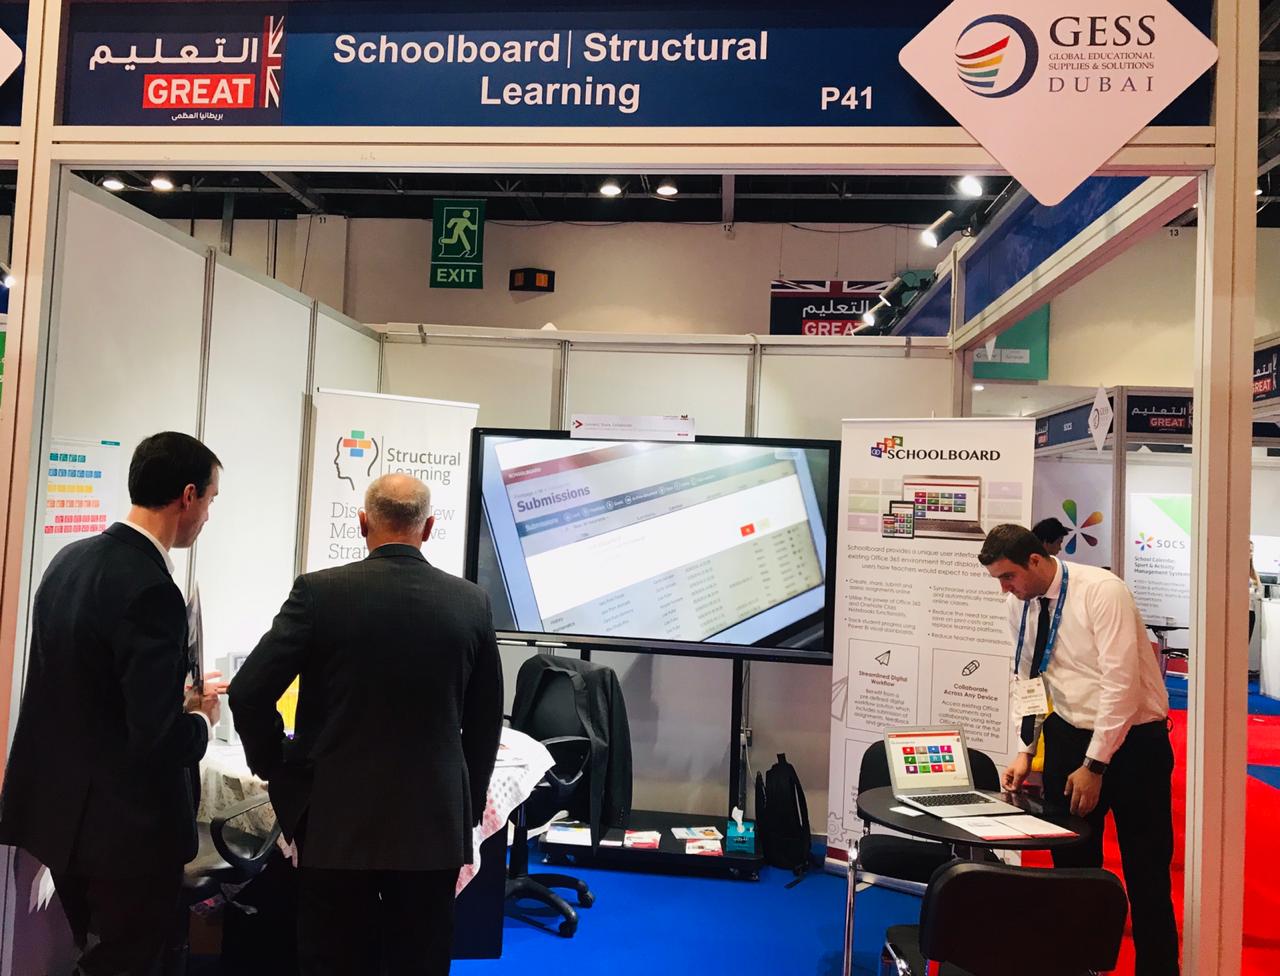 Global Education Supplies and Solutions 2019 (GESS)